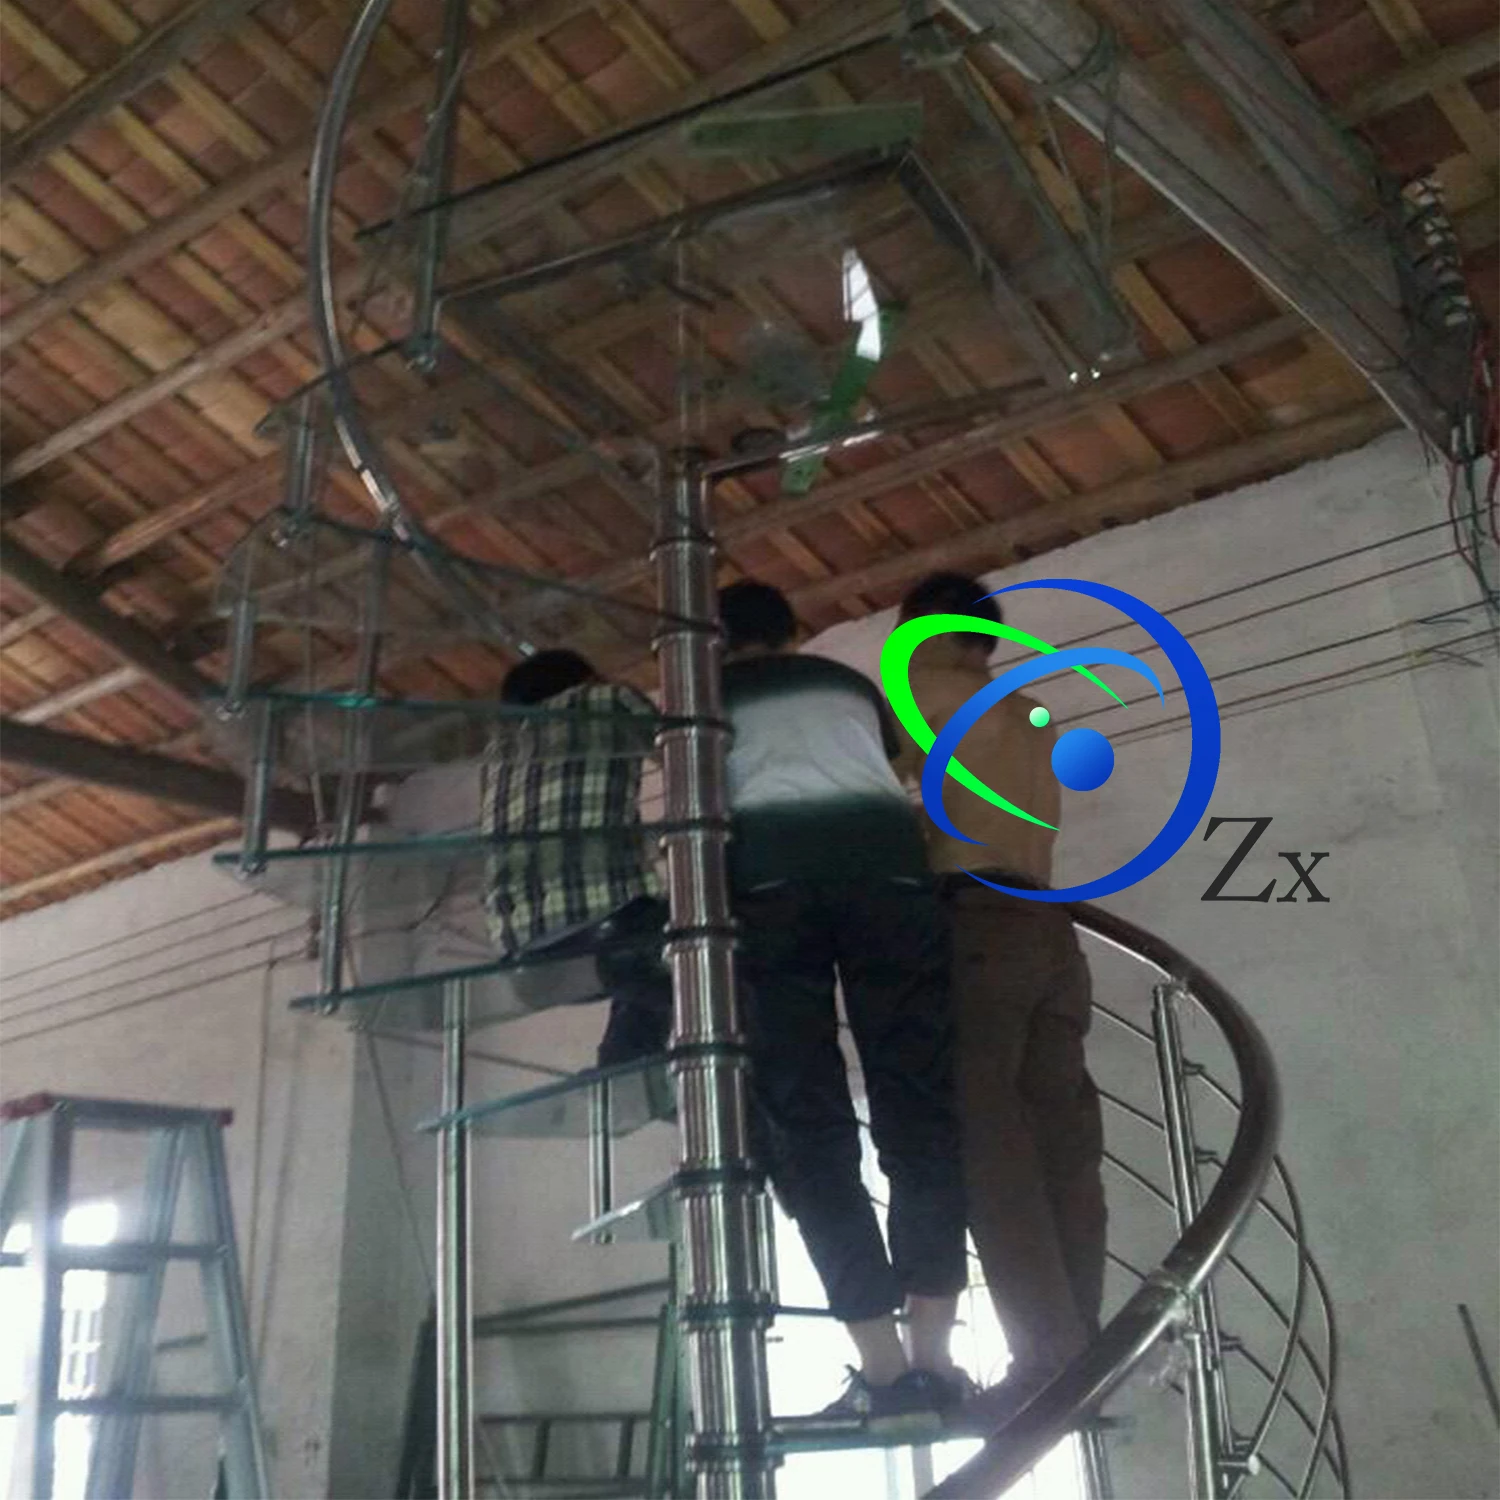 stainless steel spiral staircases